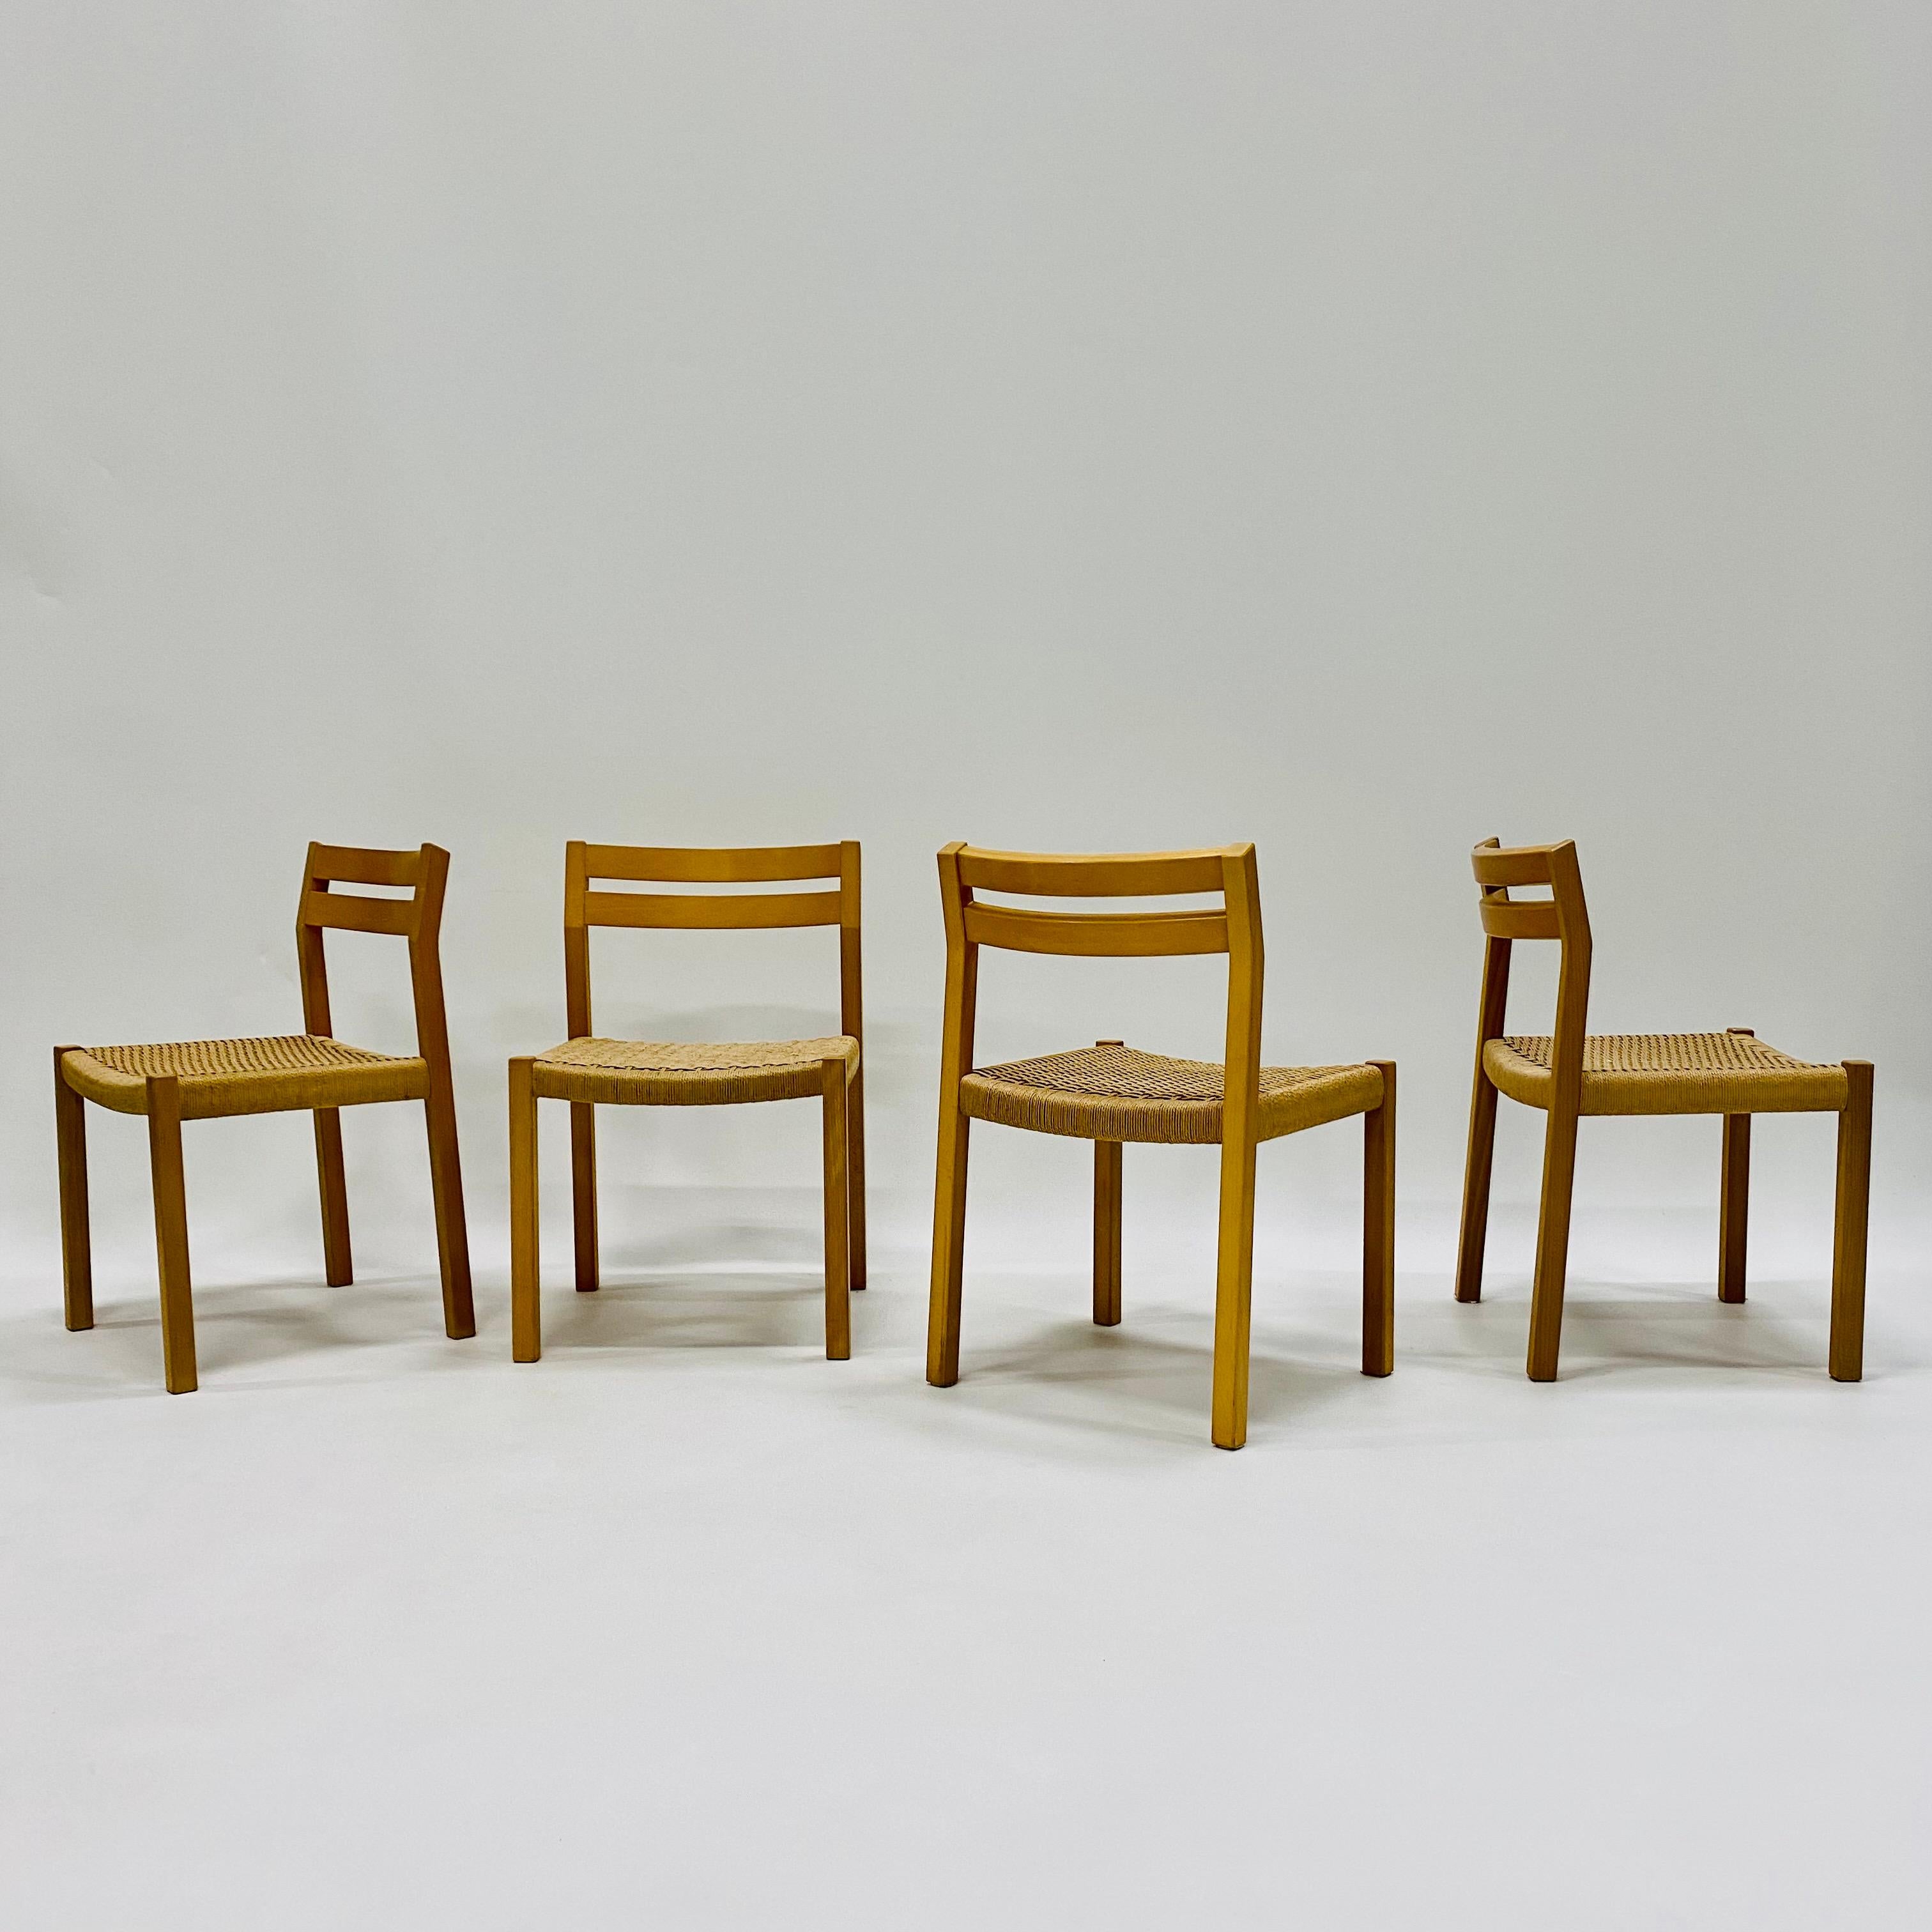 Late 20th Century 4 x J.L. Möller Papercord Dining Chairs by Niels O. Möller Denmark 1970 For Sale